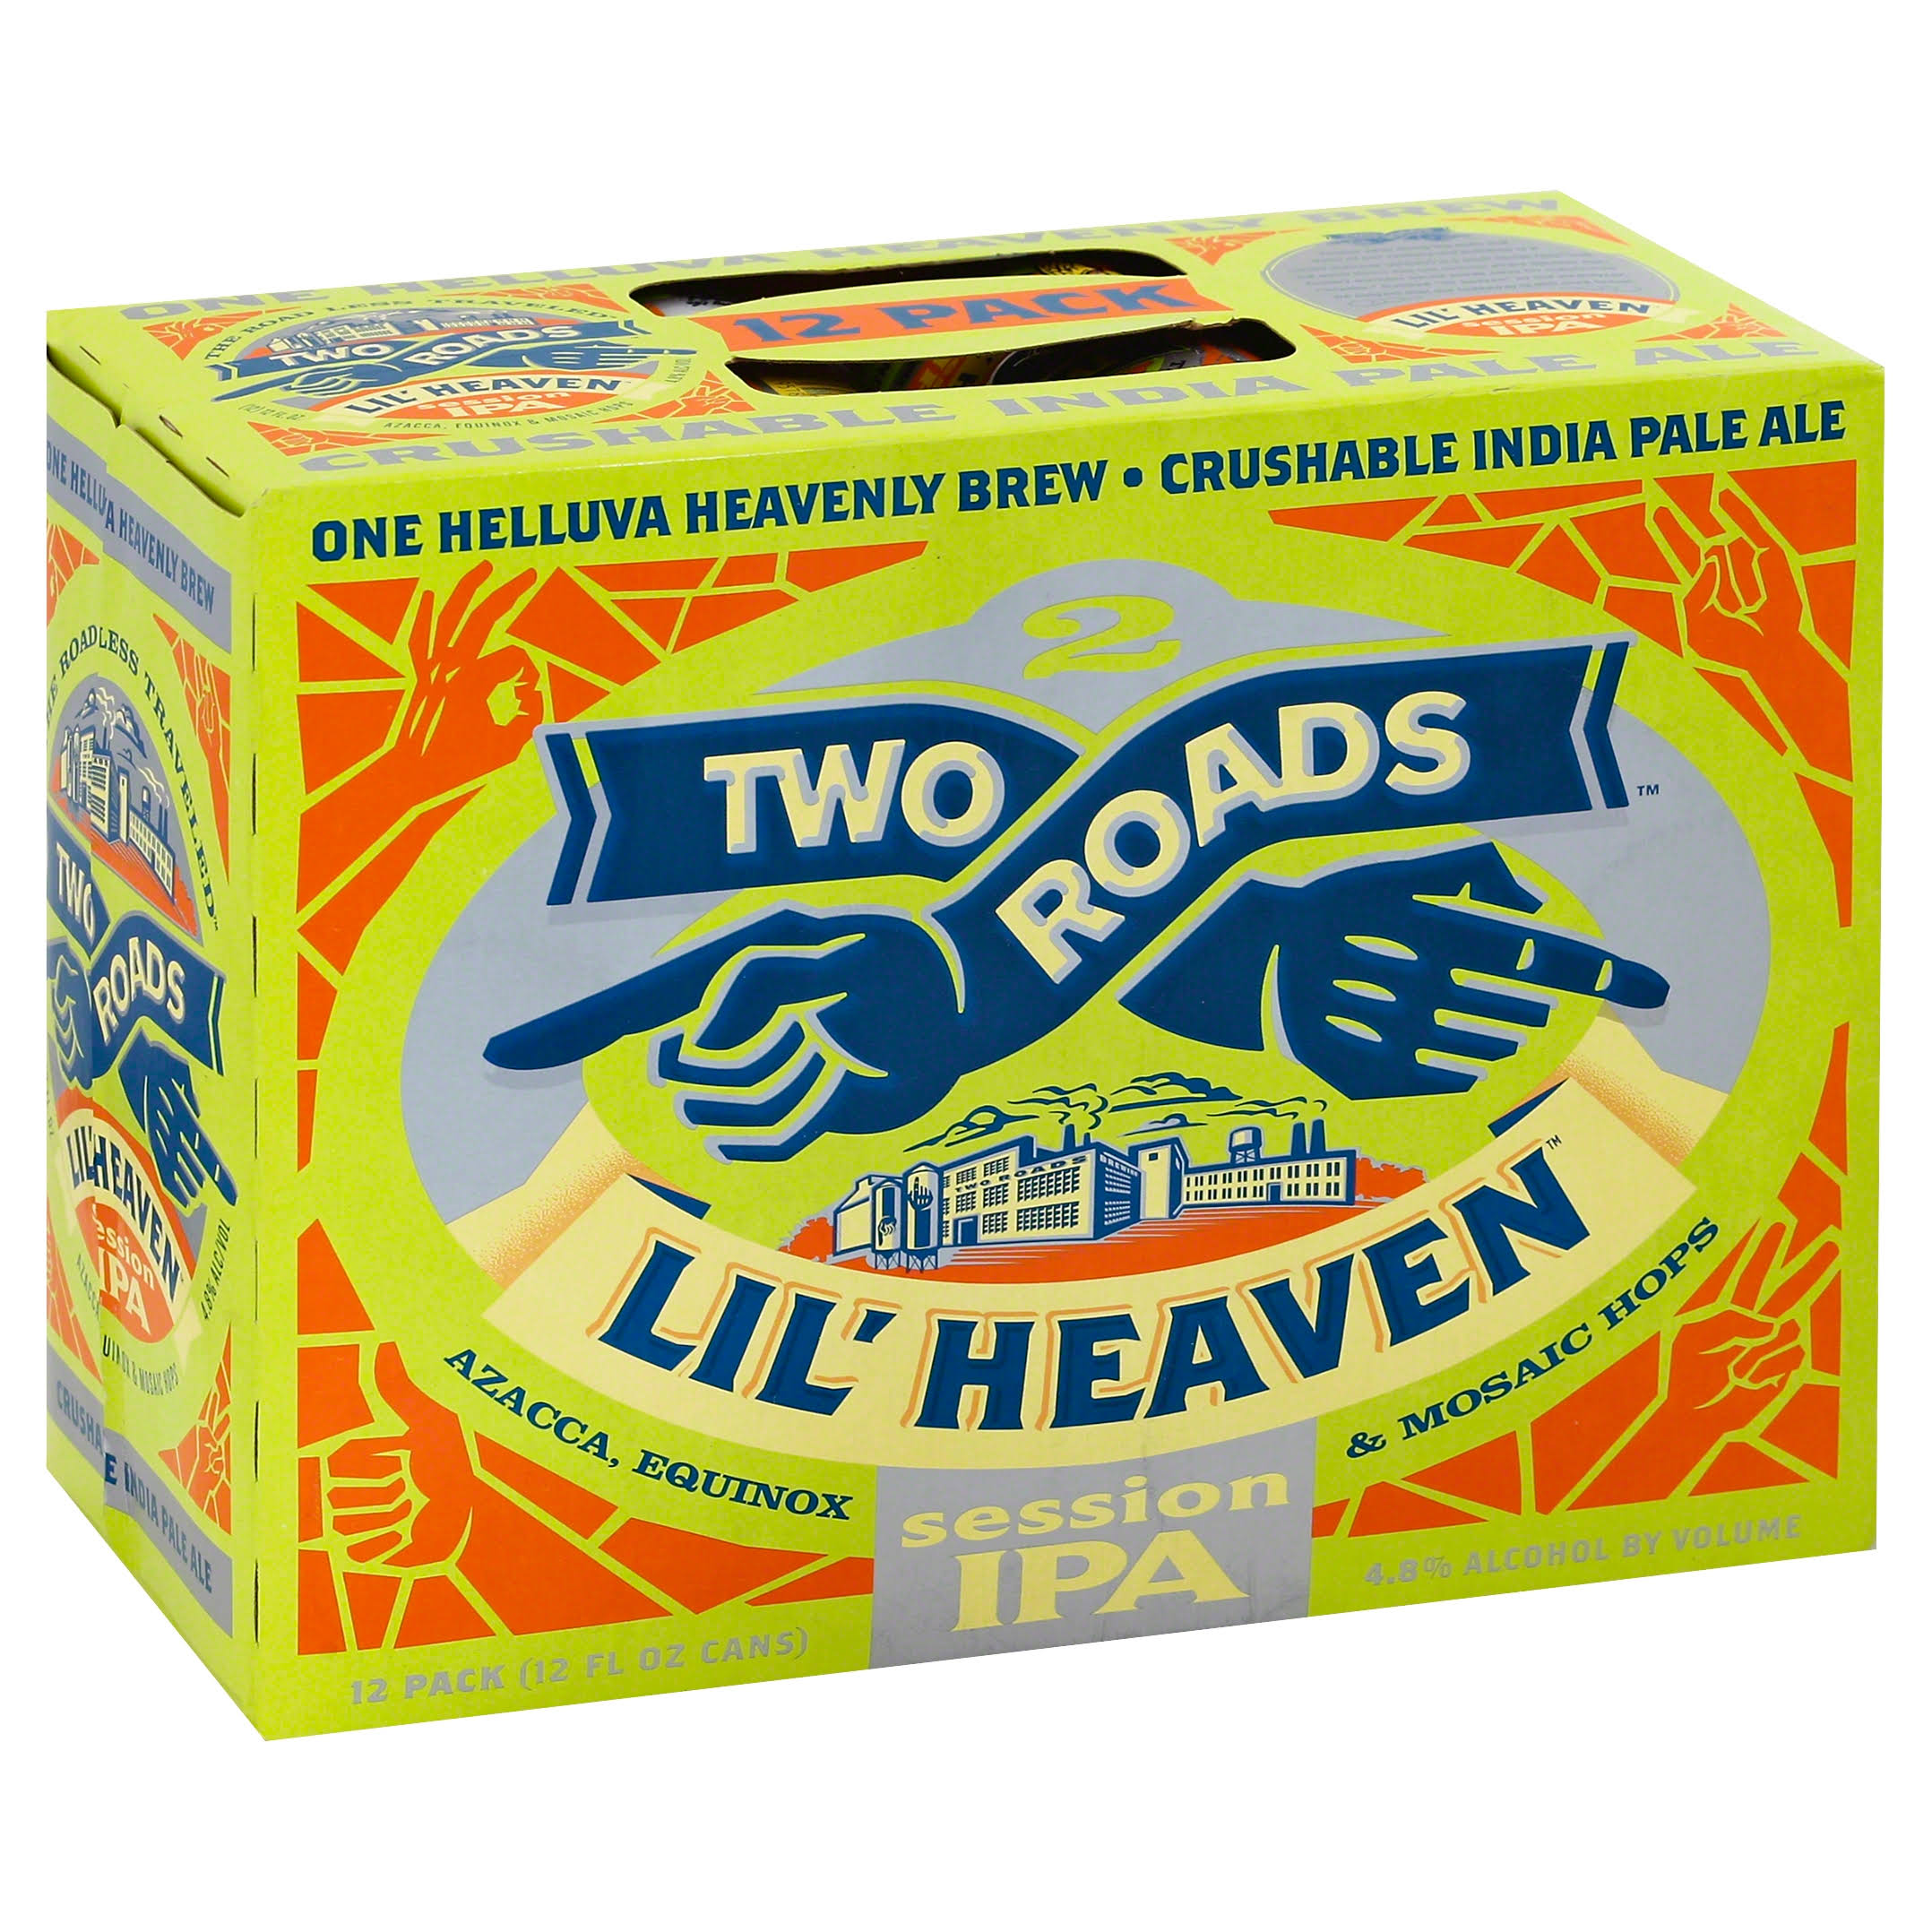 Two Roads Beer, Session IPA, Lil' Heaven, 12 Pack - 12 pack (12 fl oz cans)